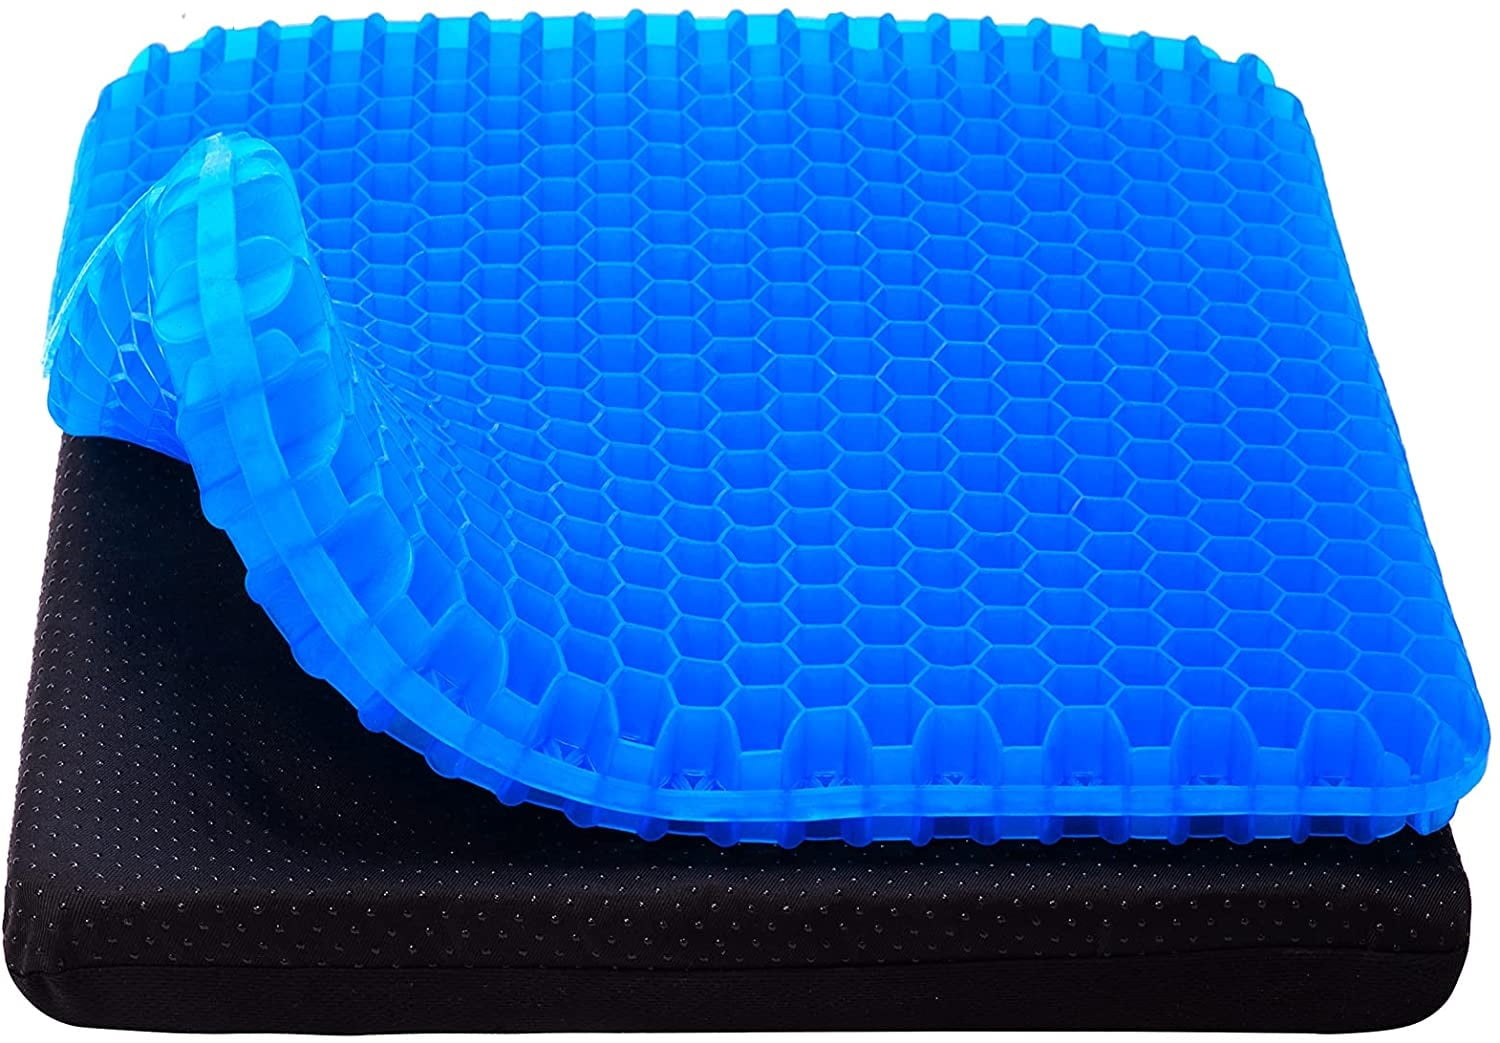 Eggcrate Seat Cushion with Poly-Cotton Cover